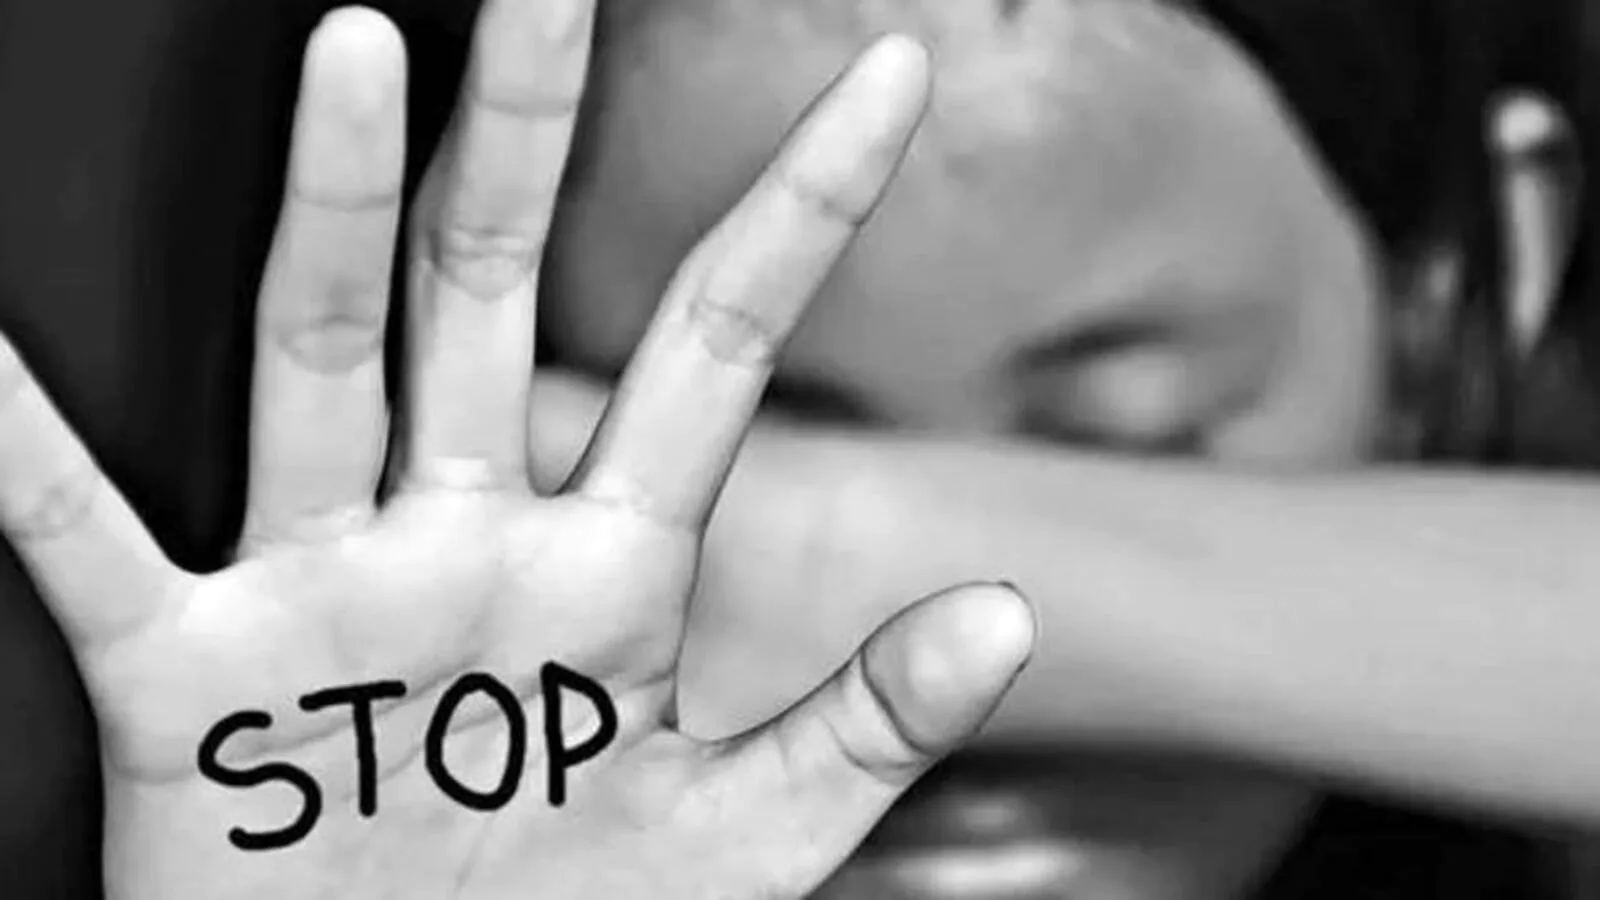 In MP’s Sagar, 20-year-old woman gang-raped by 4 including two minors